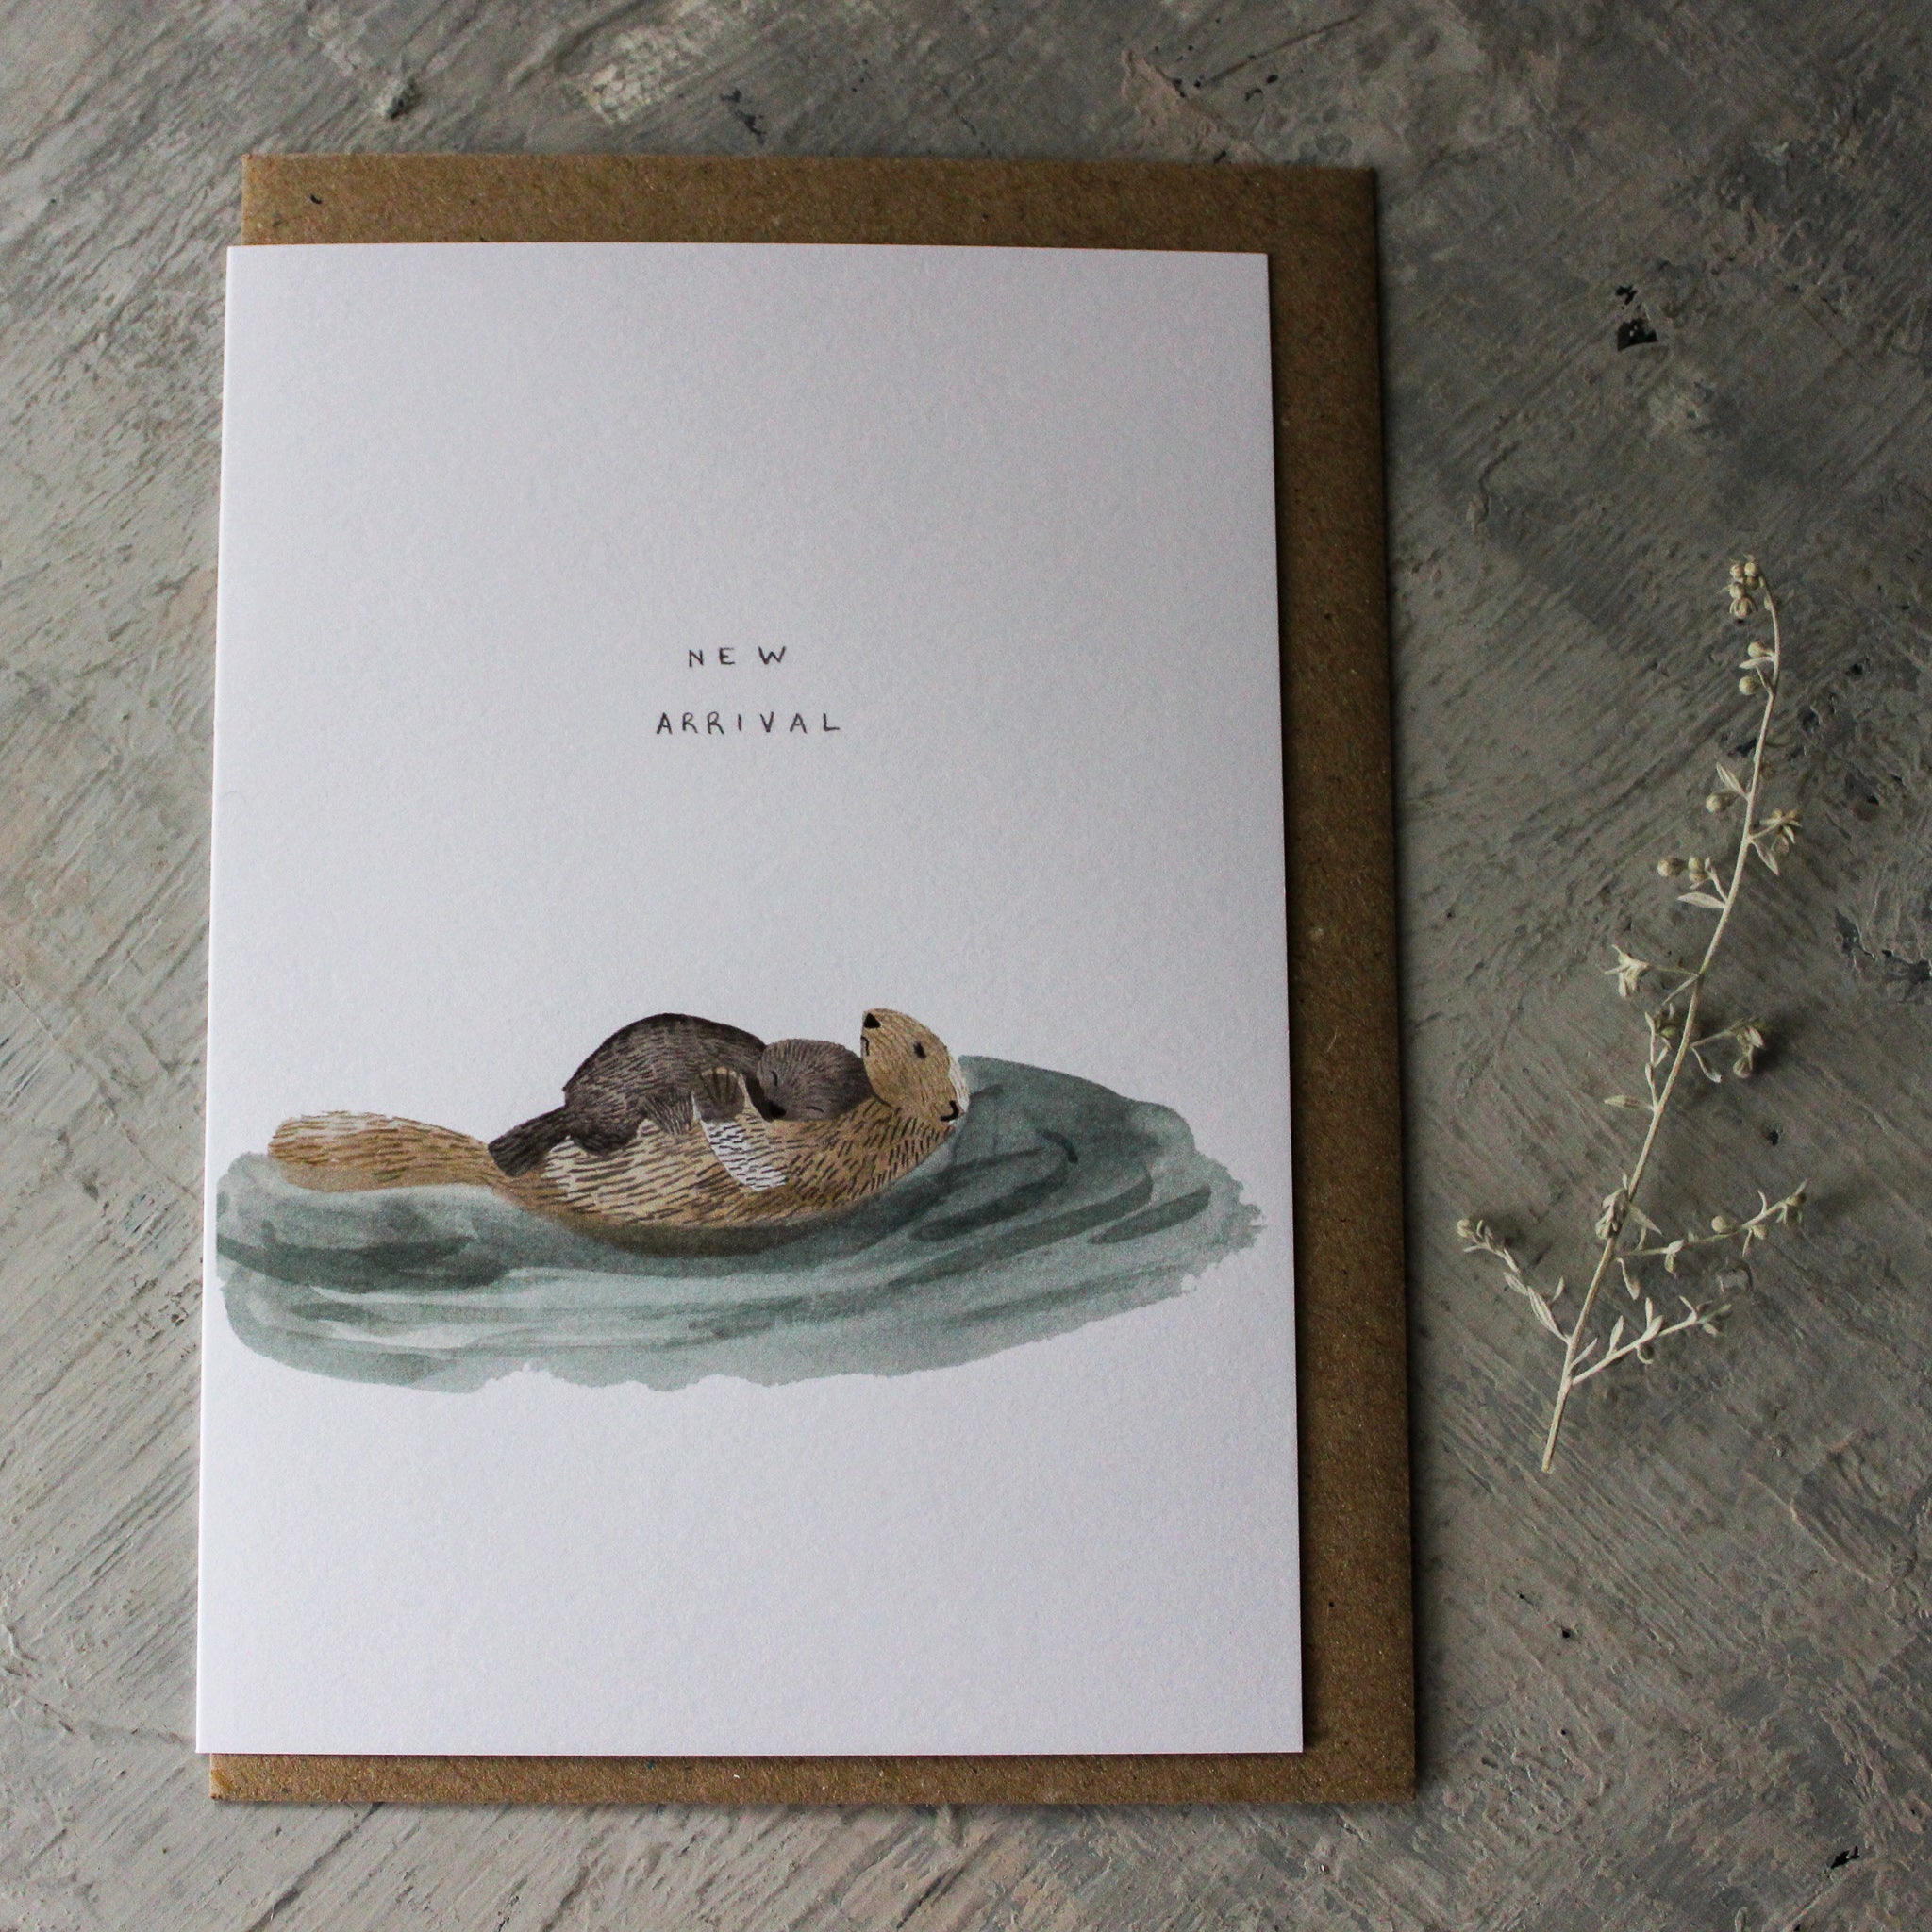 New Arrival Otter Greeting Card - Tribe Castlemaine